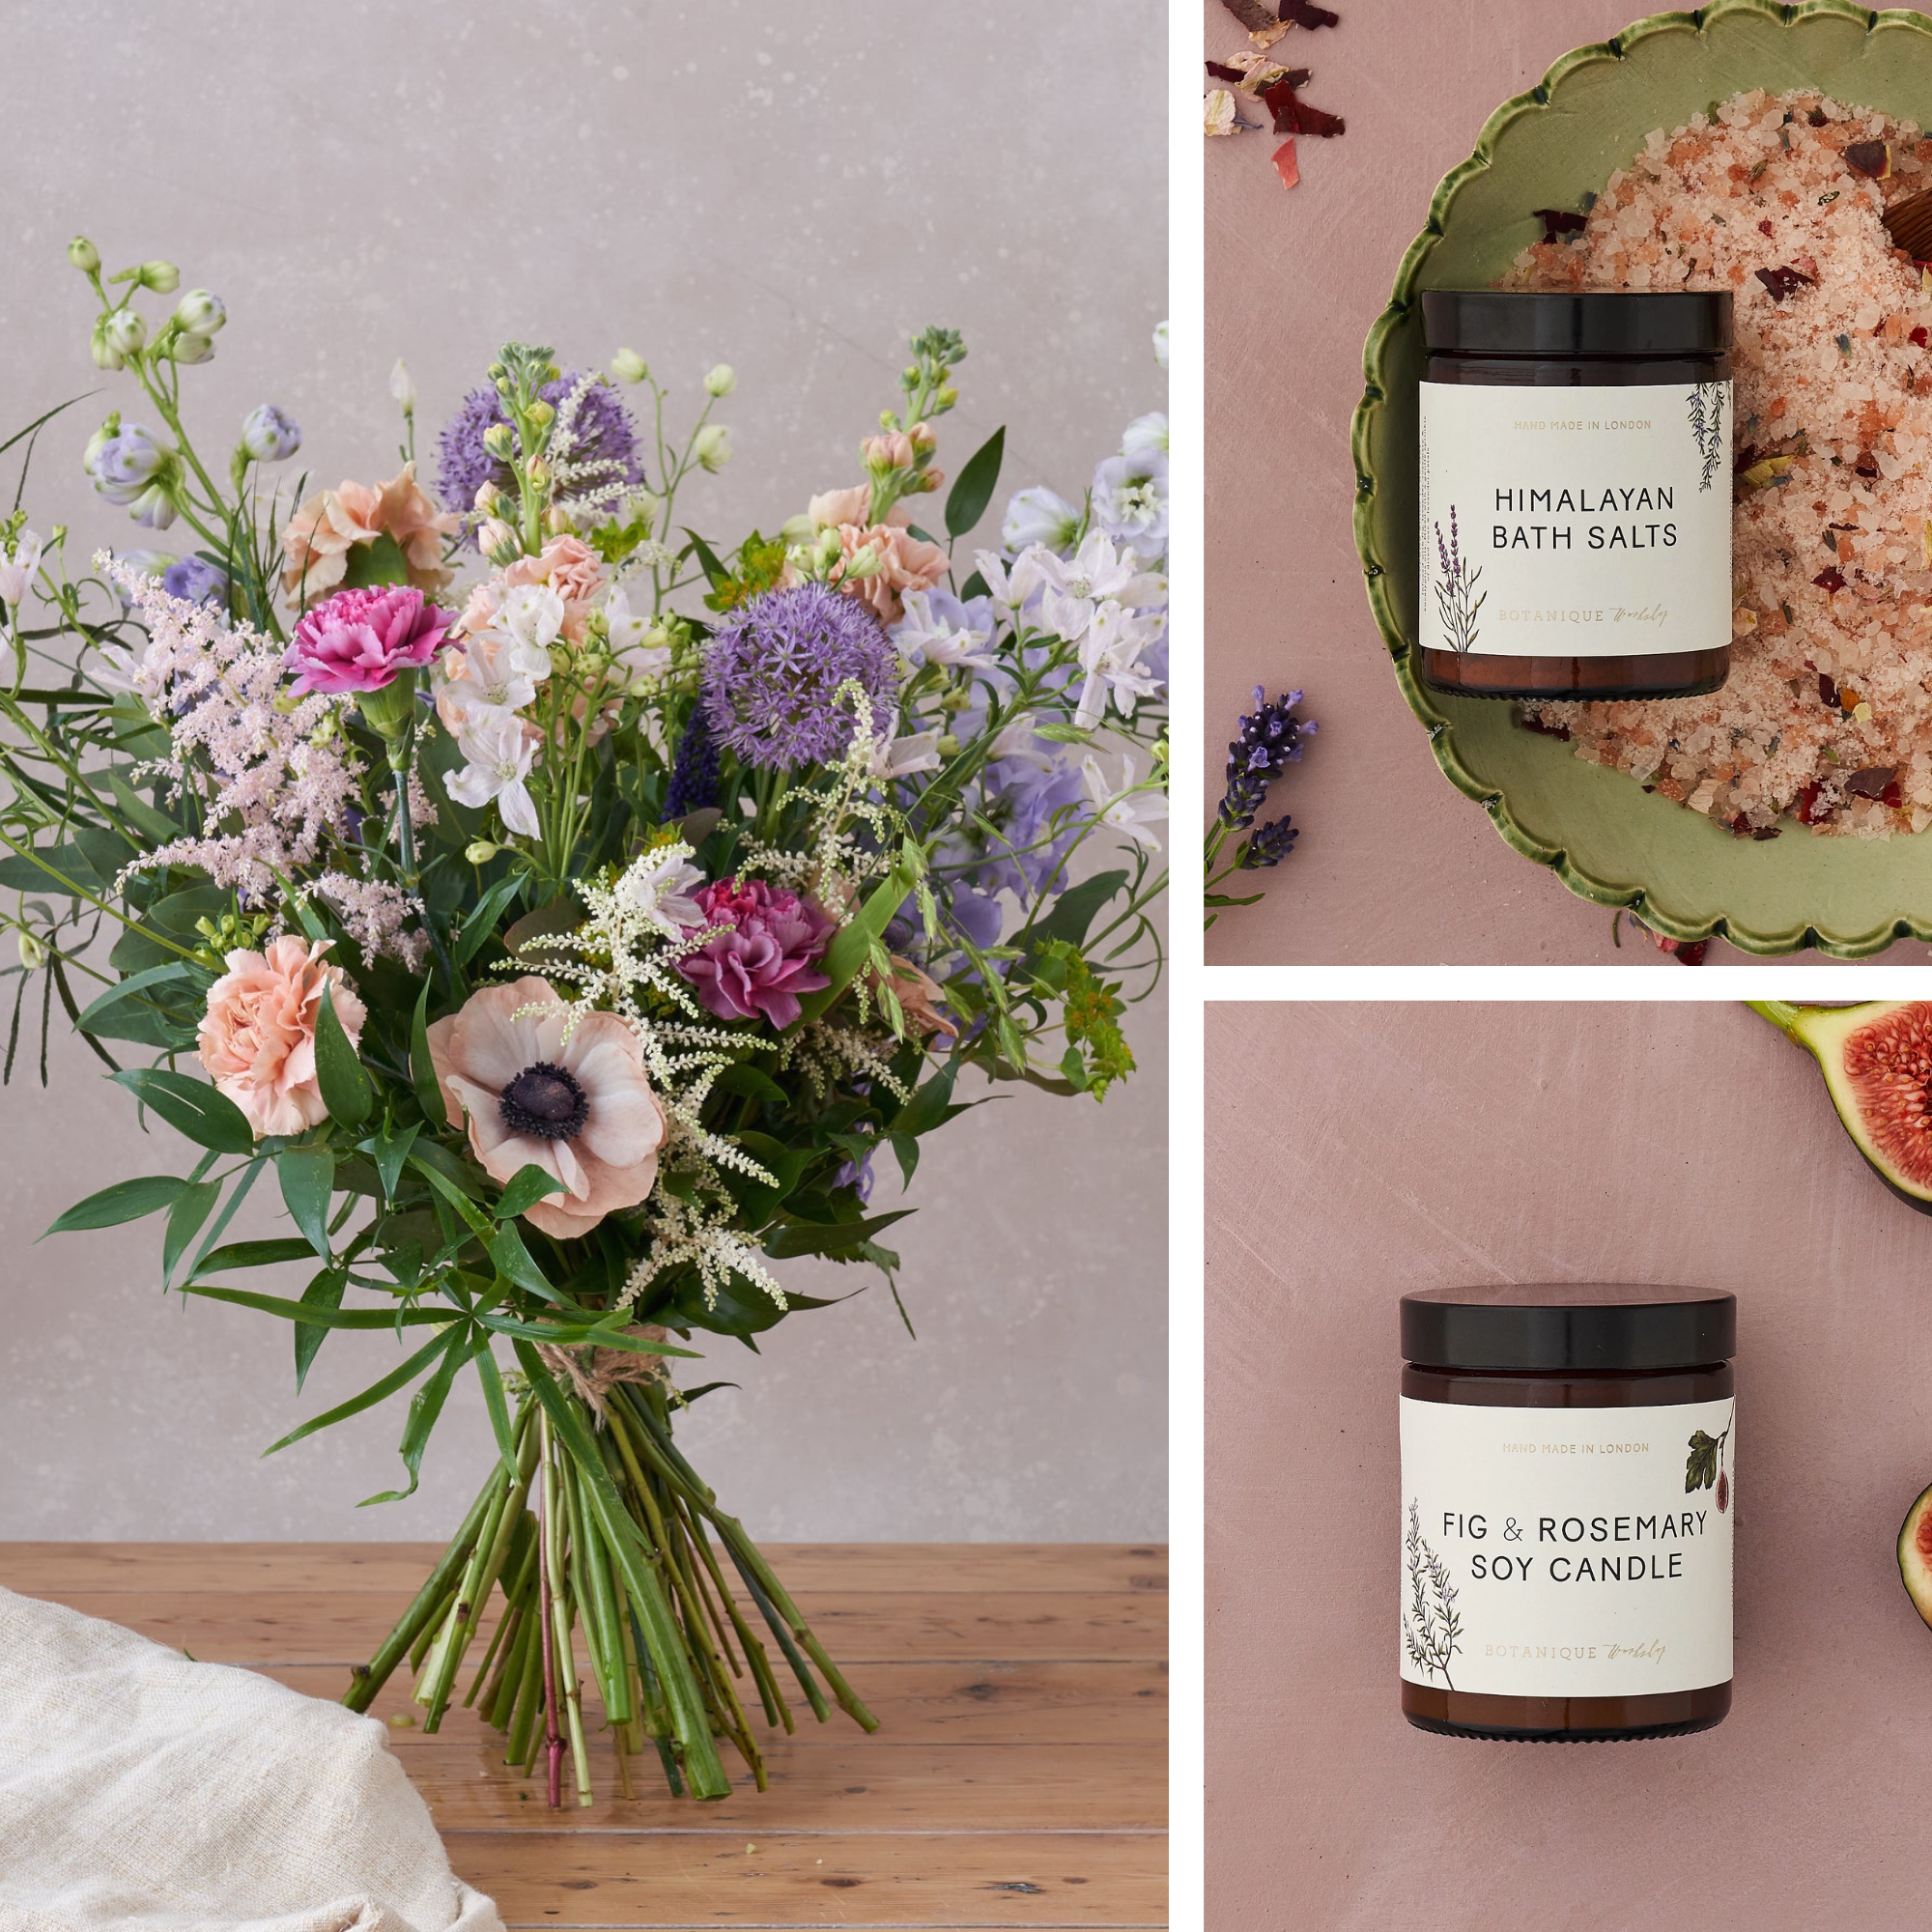 luxury gift set with flowers, bath salts and a candle by Botanique Workshop